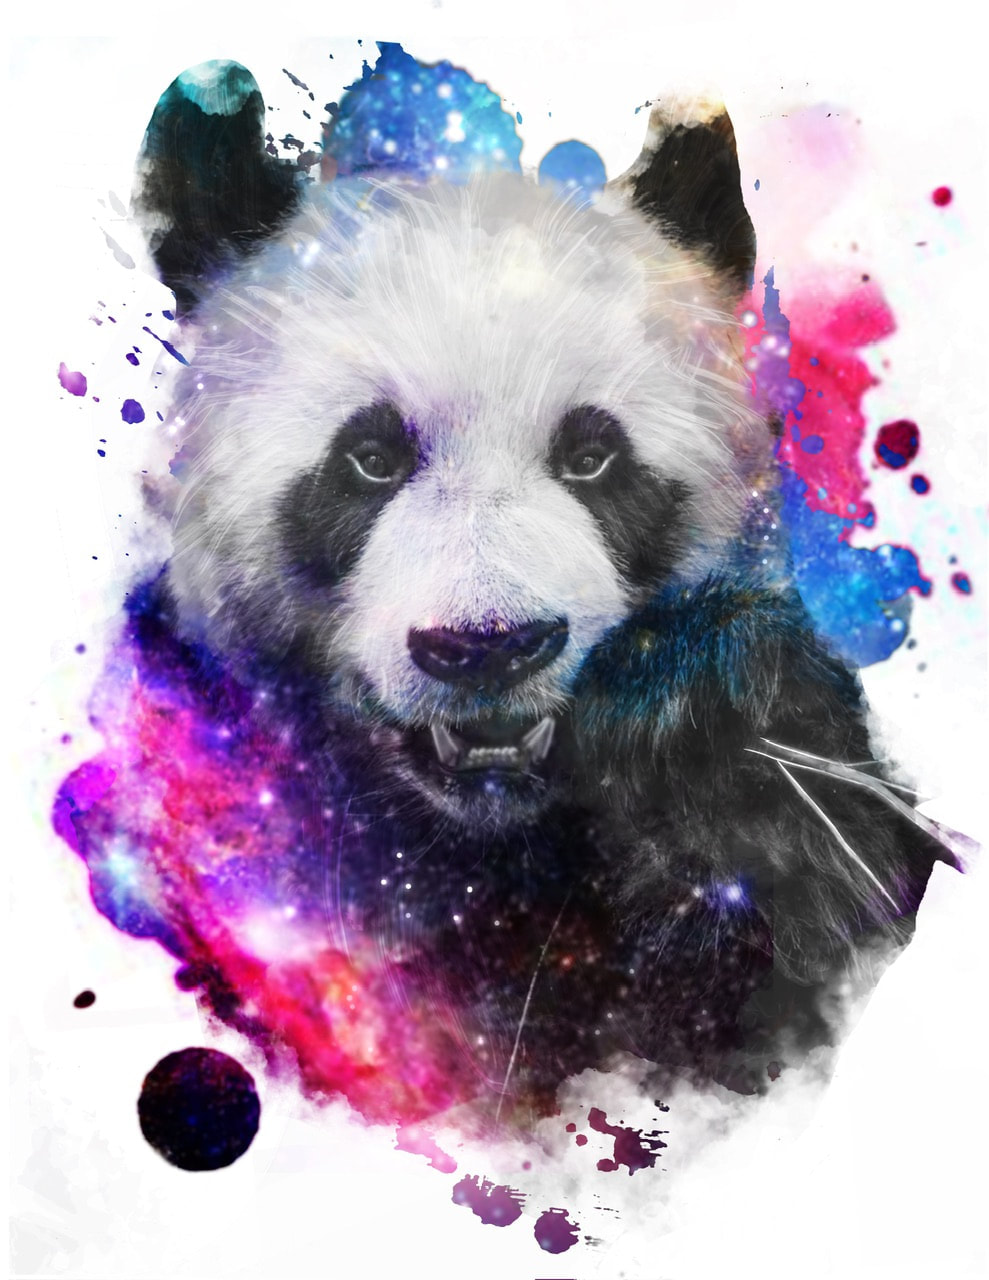 Black and white panda eating bamboo with pink, purple, and blue galaxy background. Color realism tattoo design for sale.